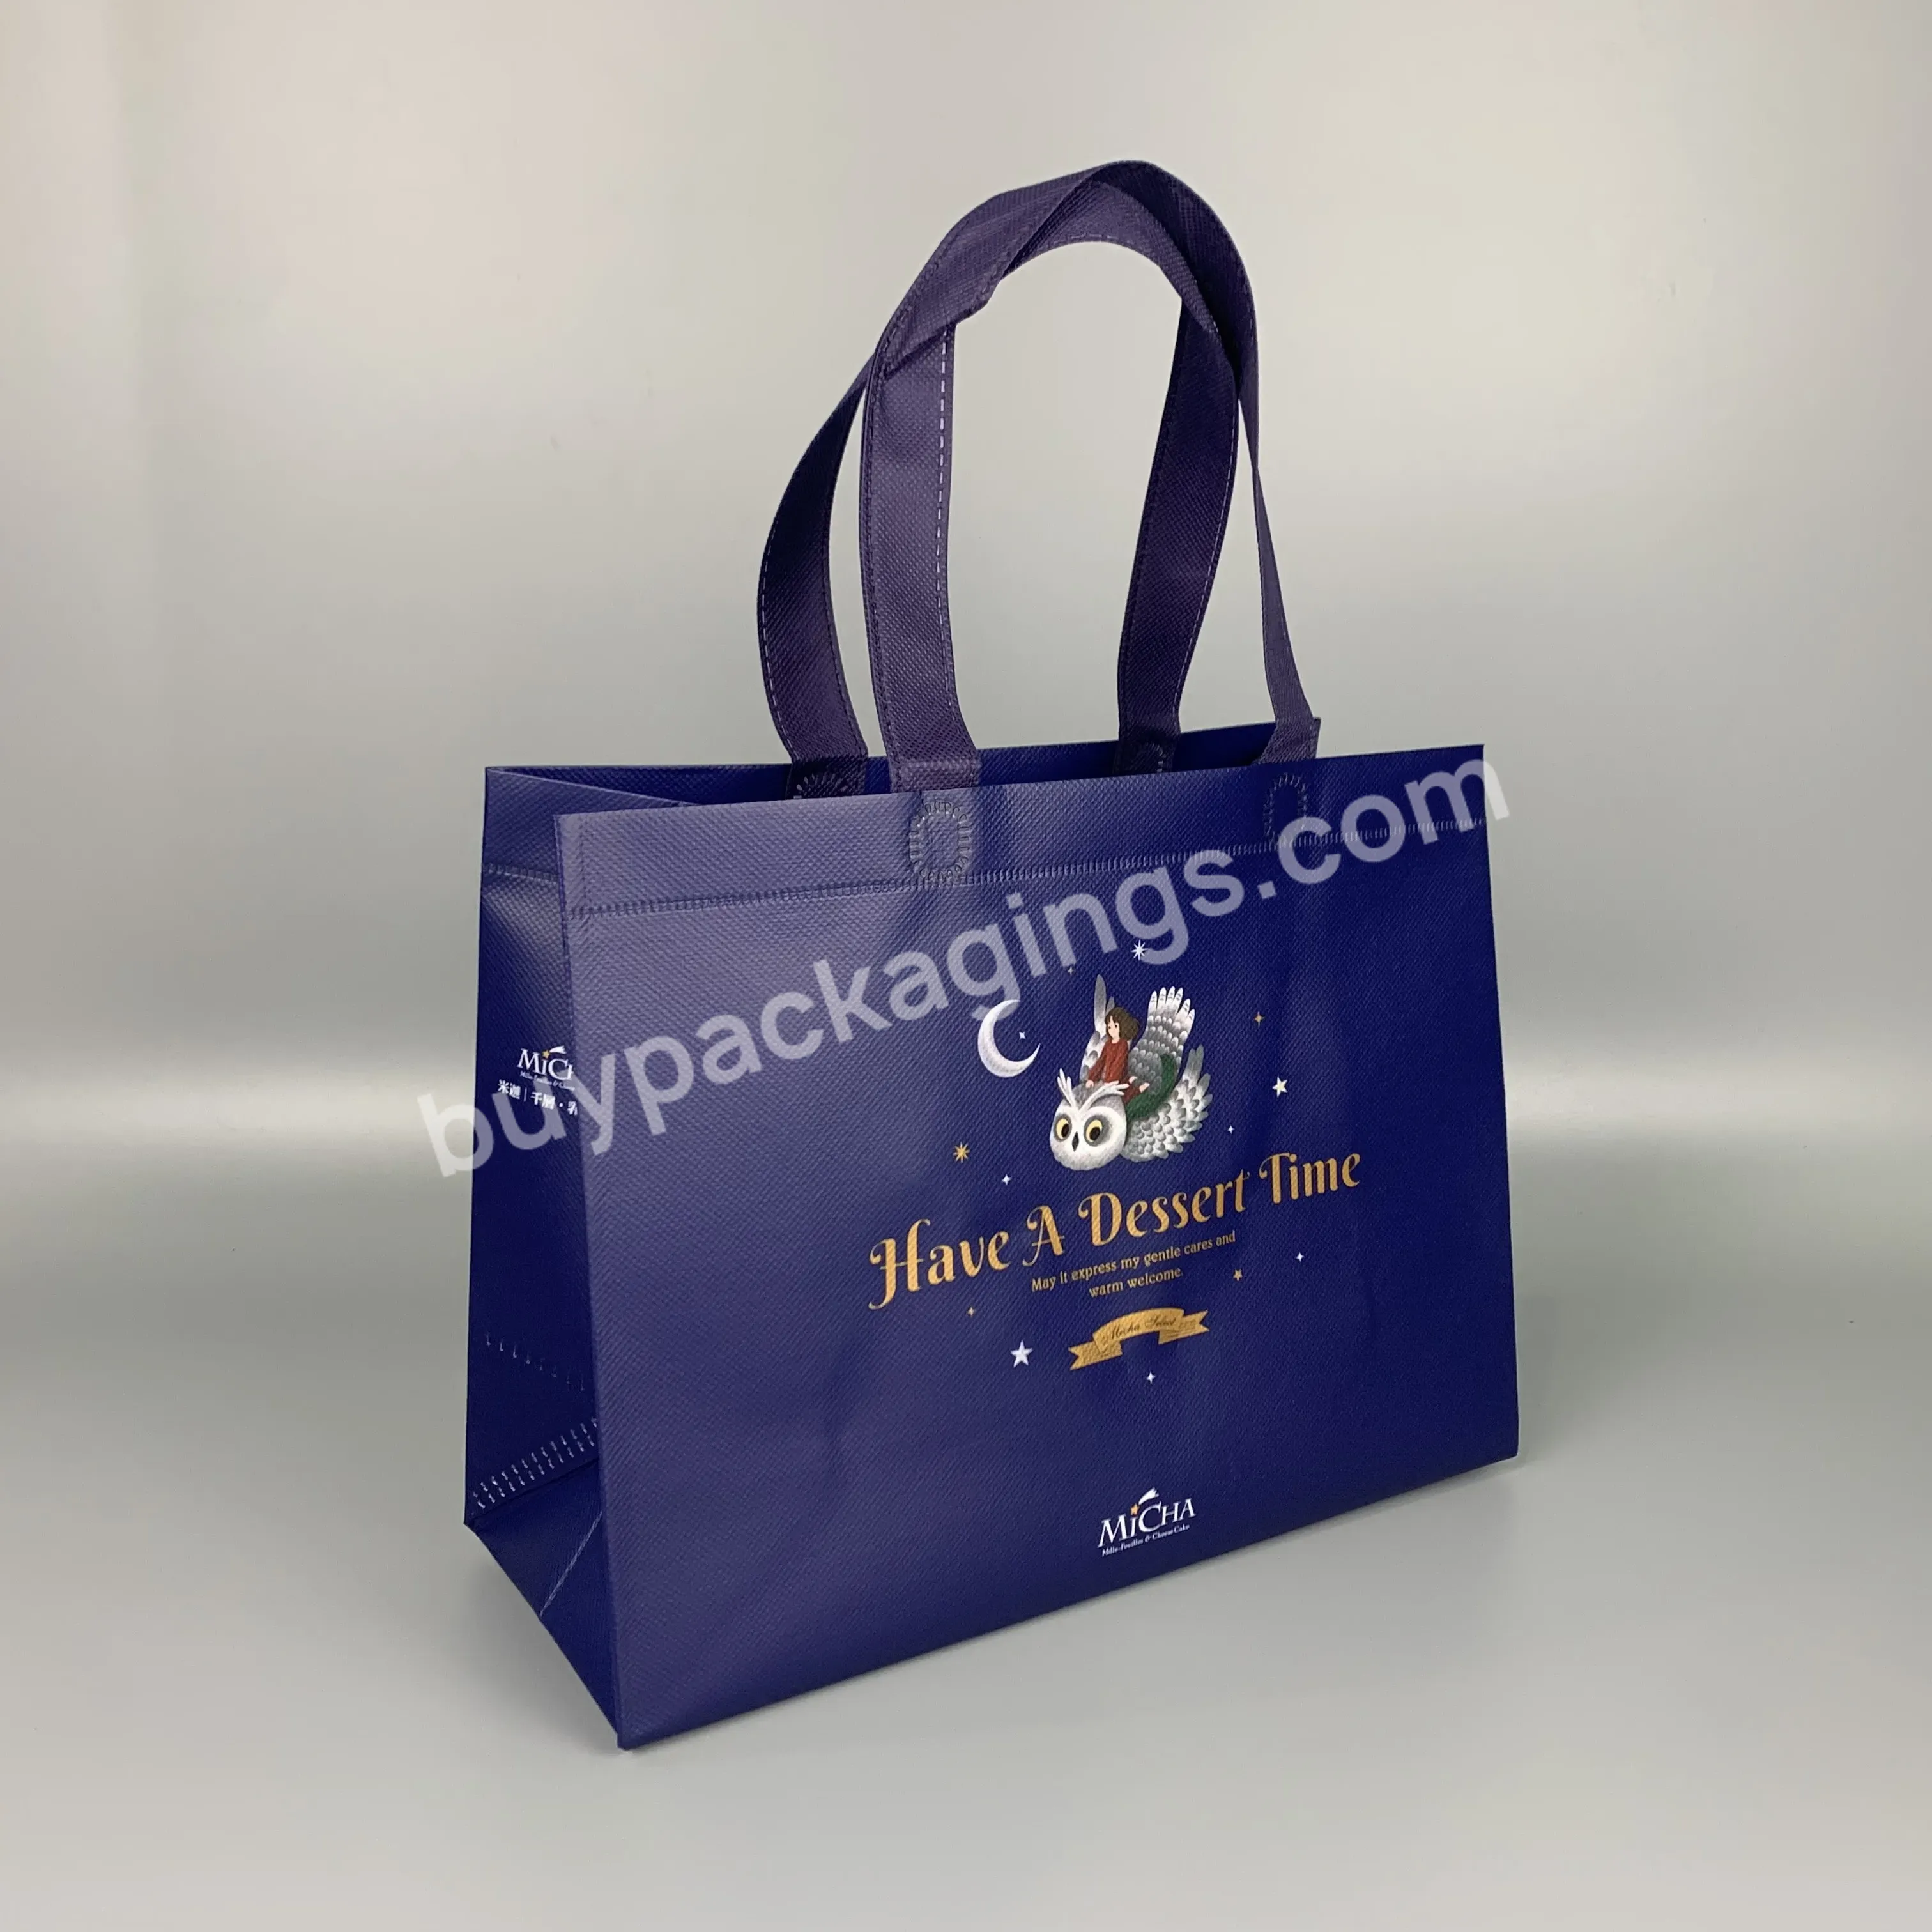 Hot Sale Reusable Recyclable Anti-water Customized Logo Colorful Non Woven Bag For Shopping - Buy Hot Sale Reusable Shopping Bag,Recyclable Anti-water Non Woven Bag,Customized Non Woven Bag With Logo.